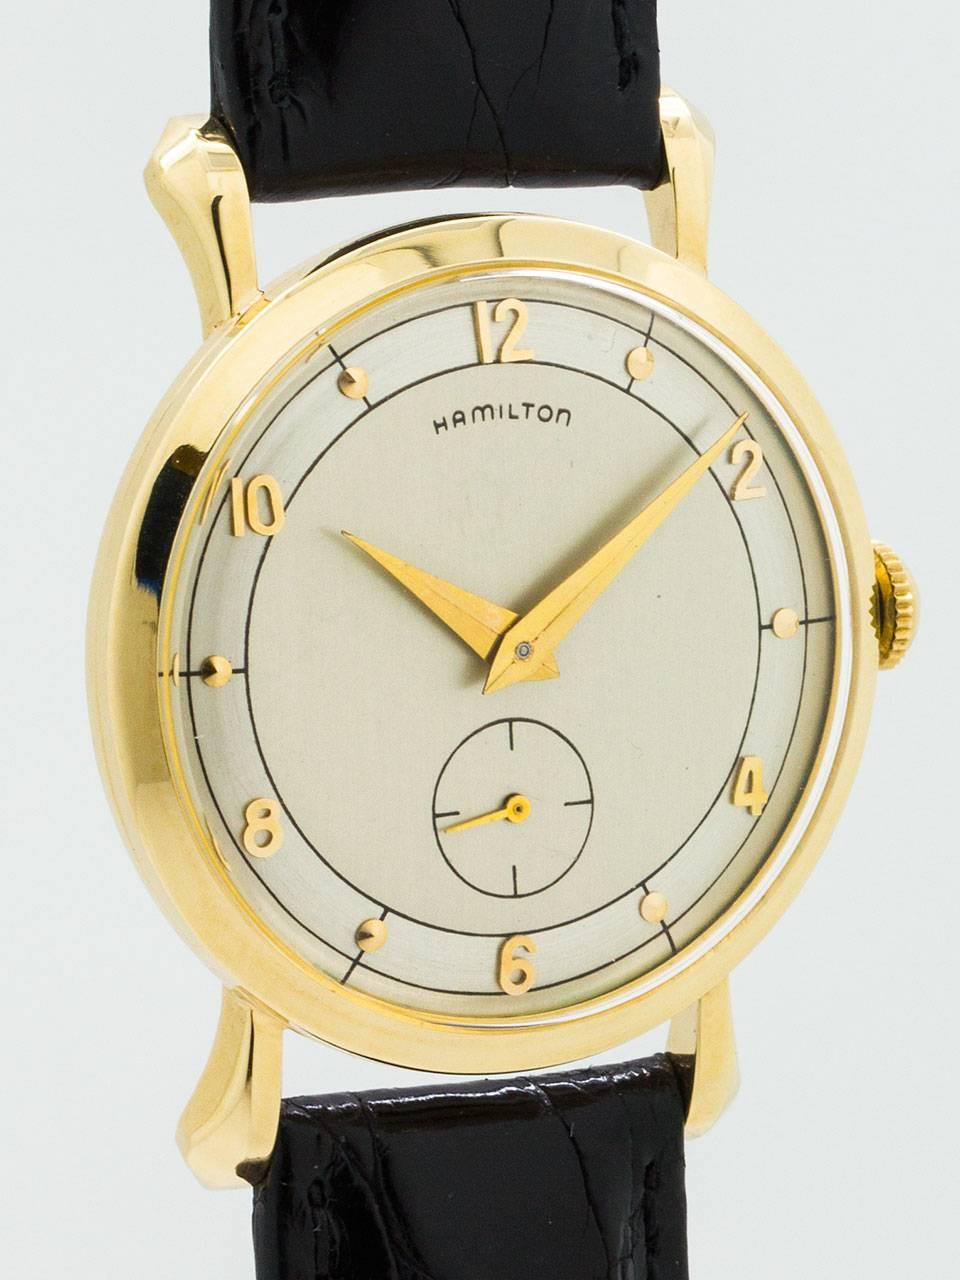 Hamilton 10K Yellow Gold “Parker B” model circa 1958. Featuring 30mm diameter case with tear drop lugs and acrylic crystal. Beautiful condition 2 tone silvered satin dial with applied 18K yellow gold hour indexes and tapered alpha style hands.